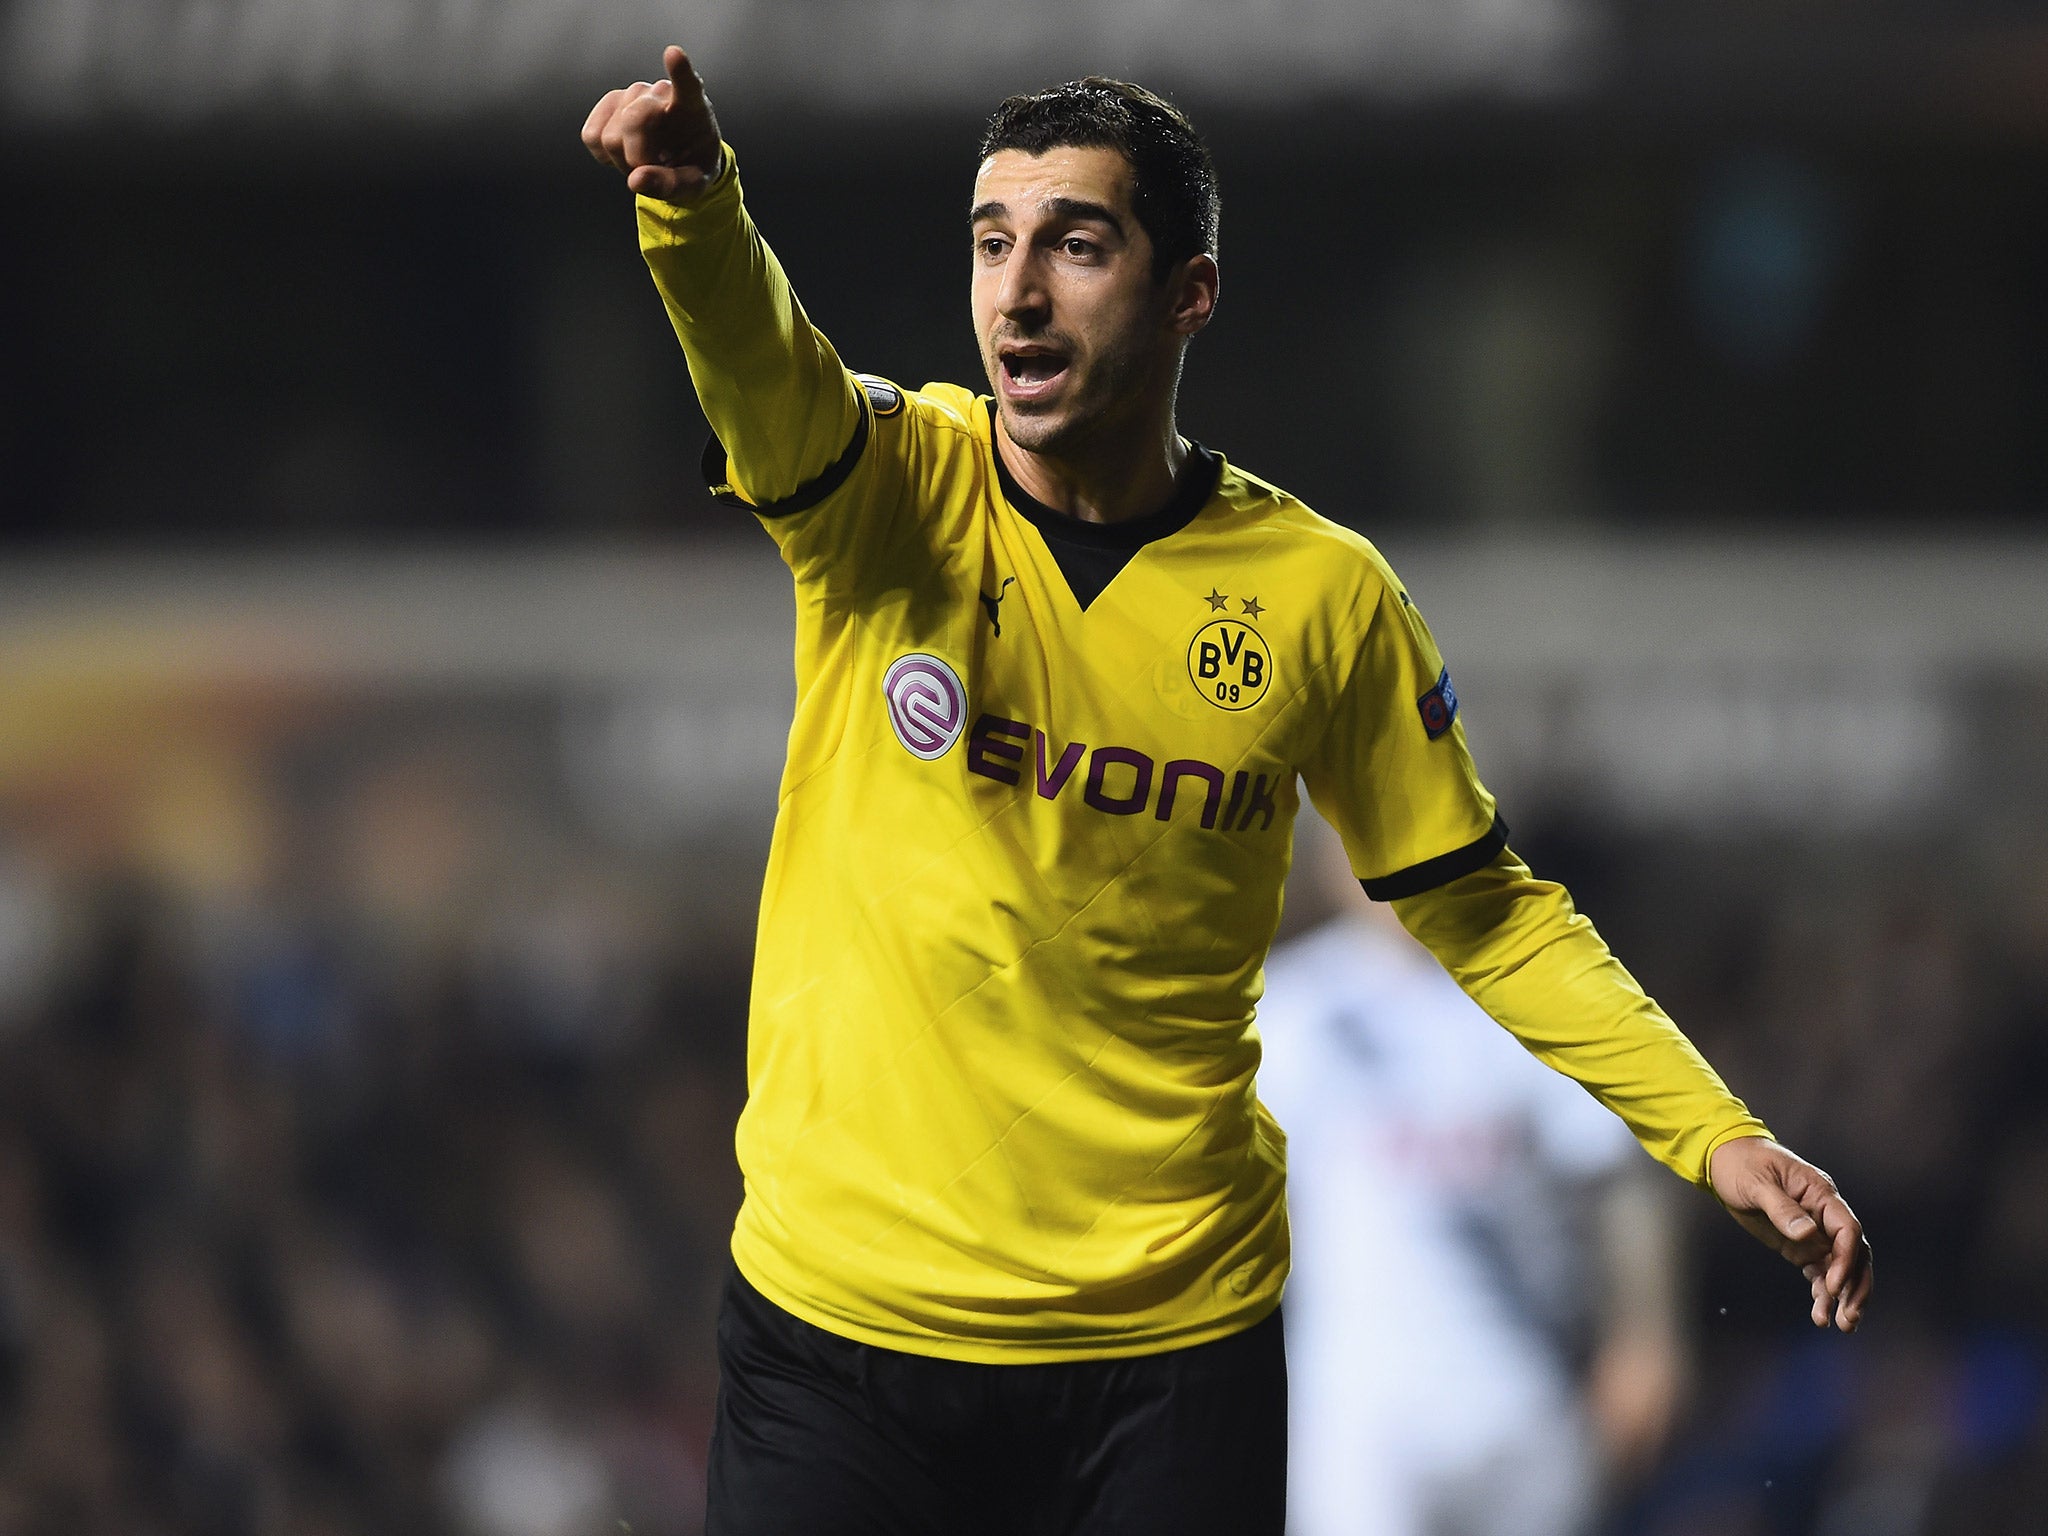 Henrikh Mkhitaryan: If there are offers - let the club decide on